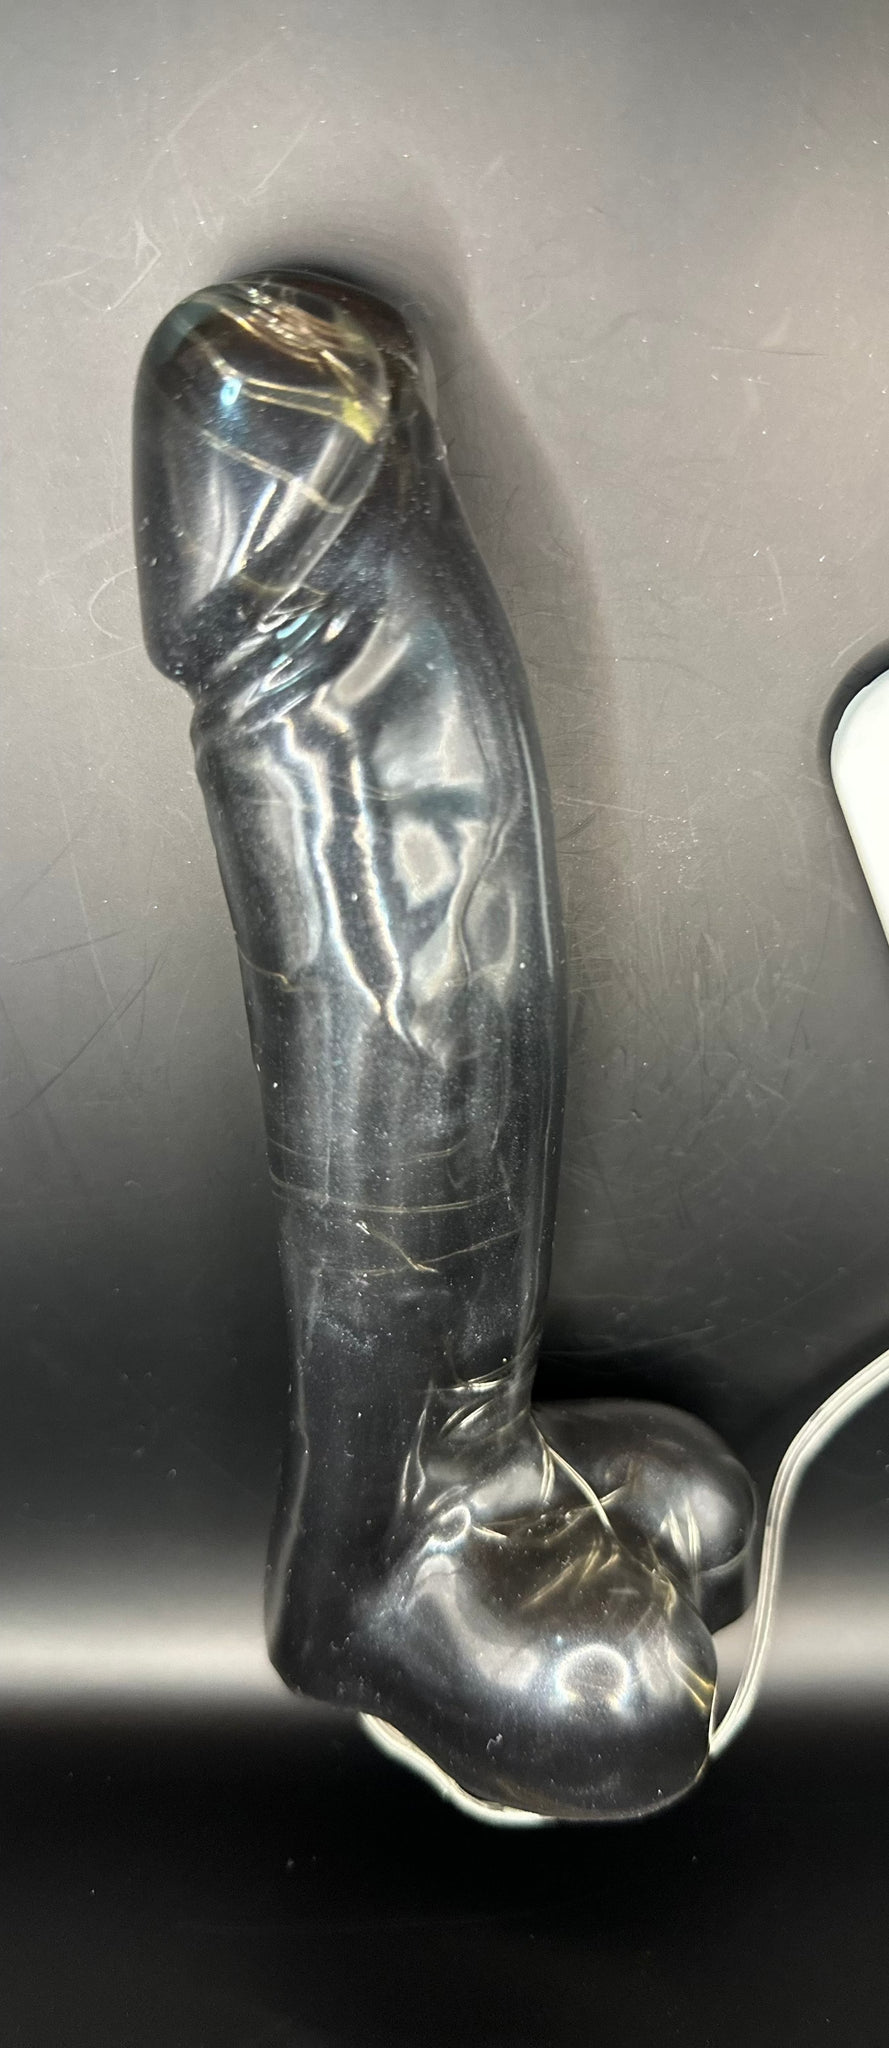 7-inch Penis - Back in Black with Colored Lights